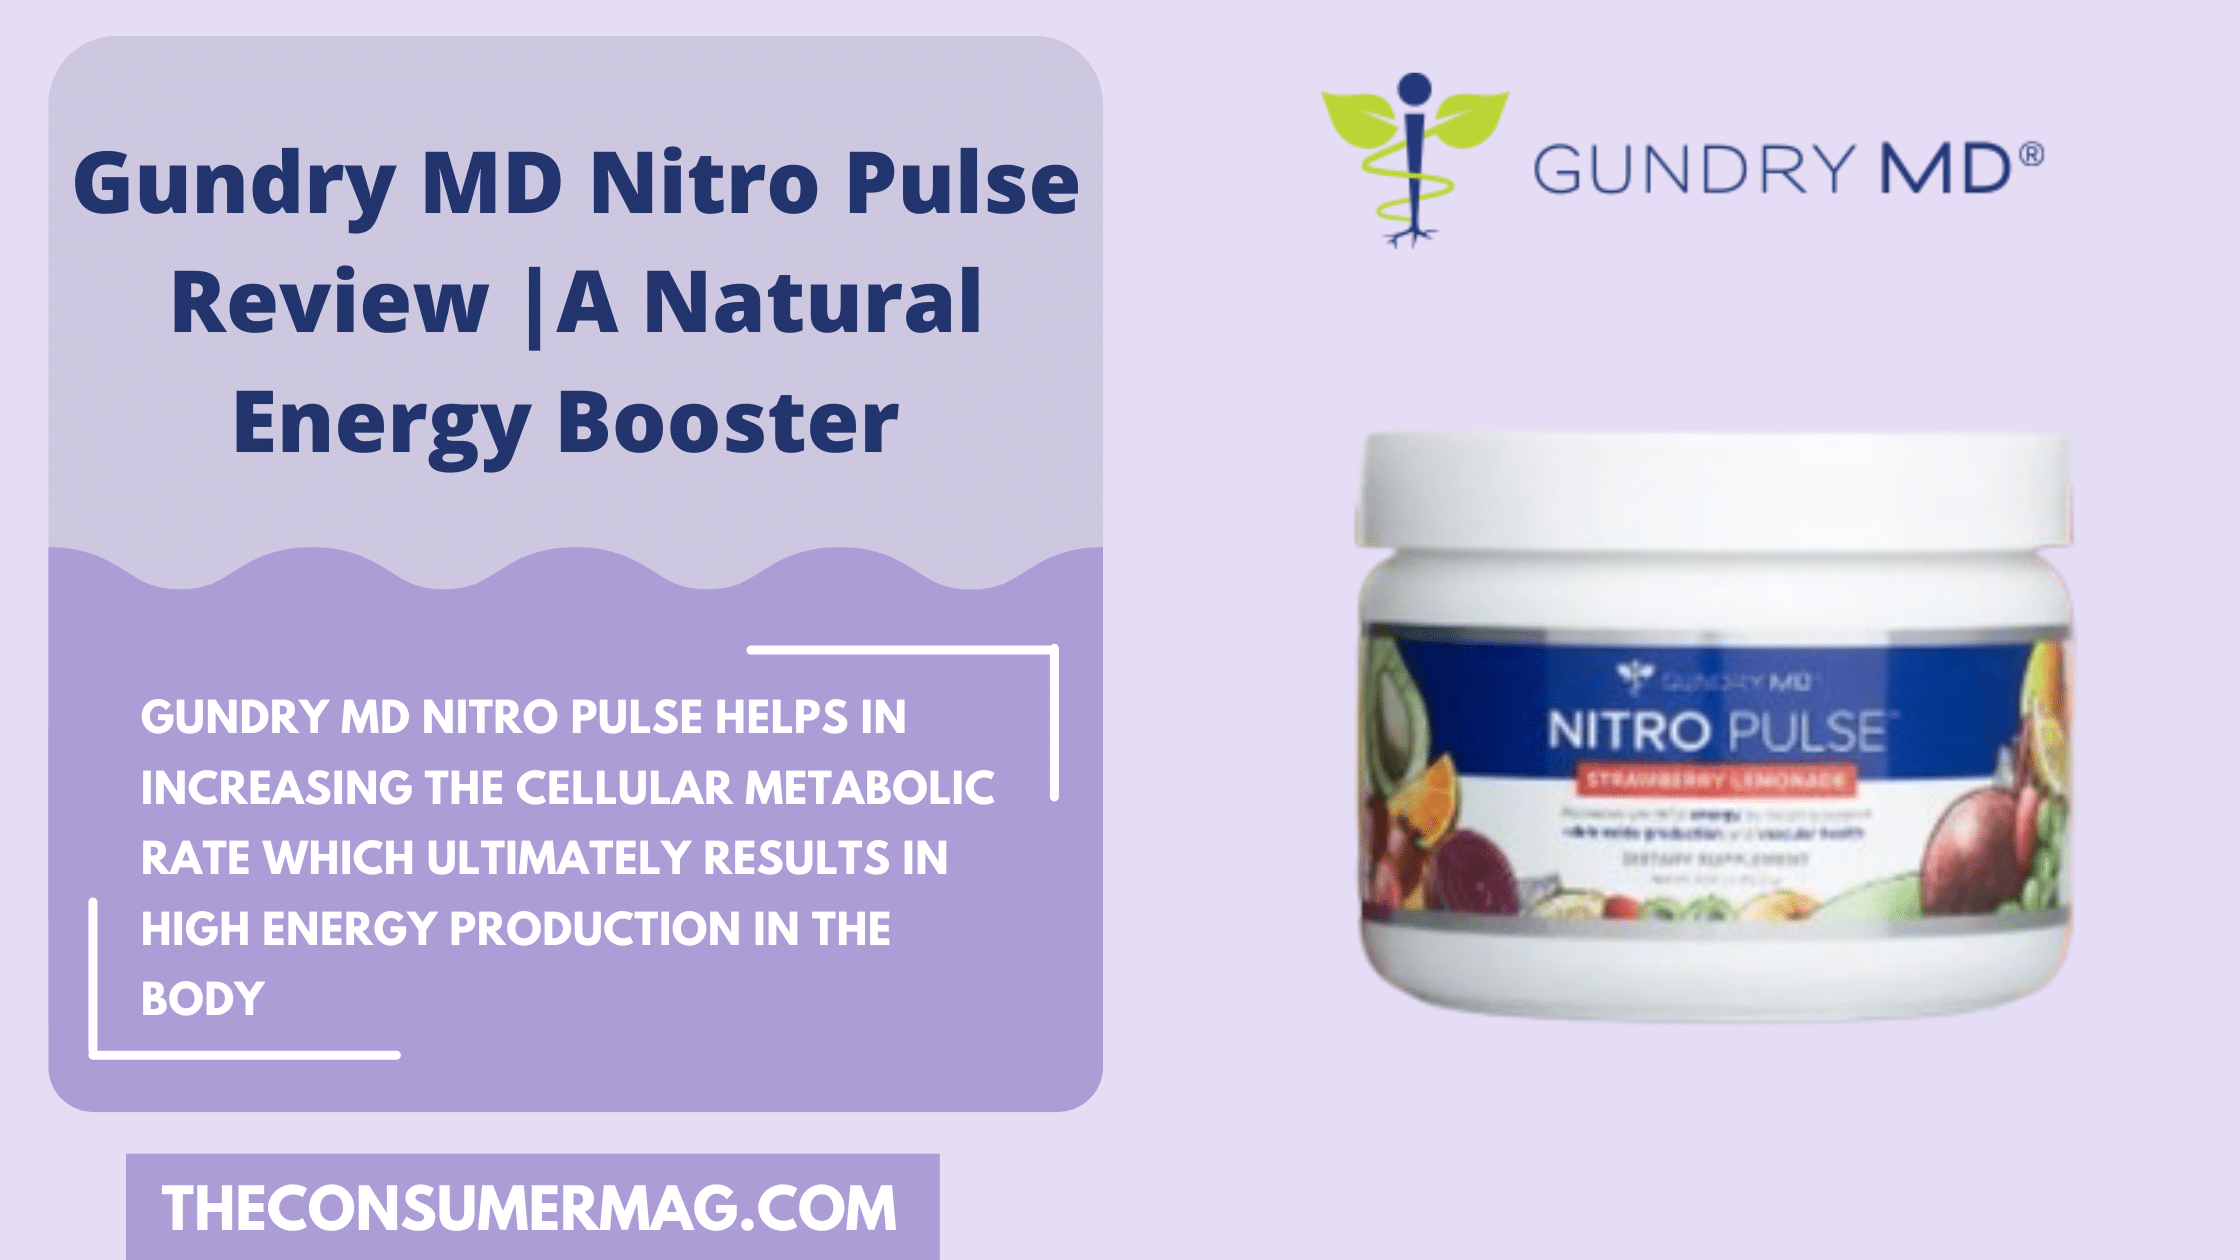 Gundry MD Nitro Pulse Review |A Natural Energy Booster